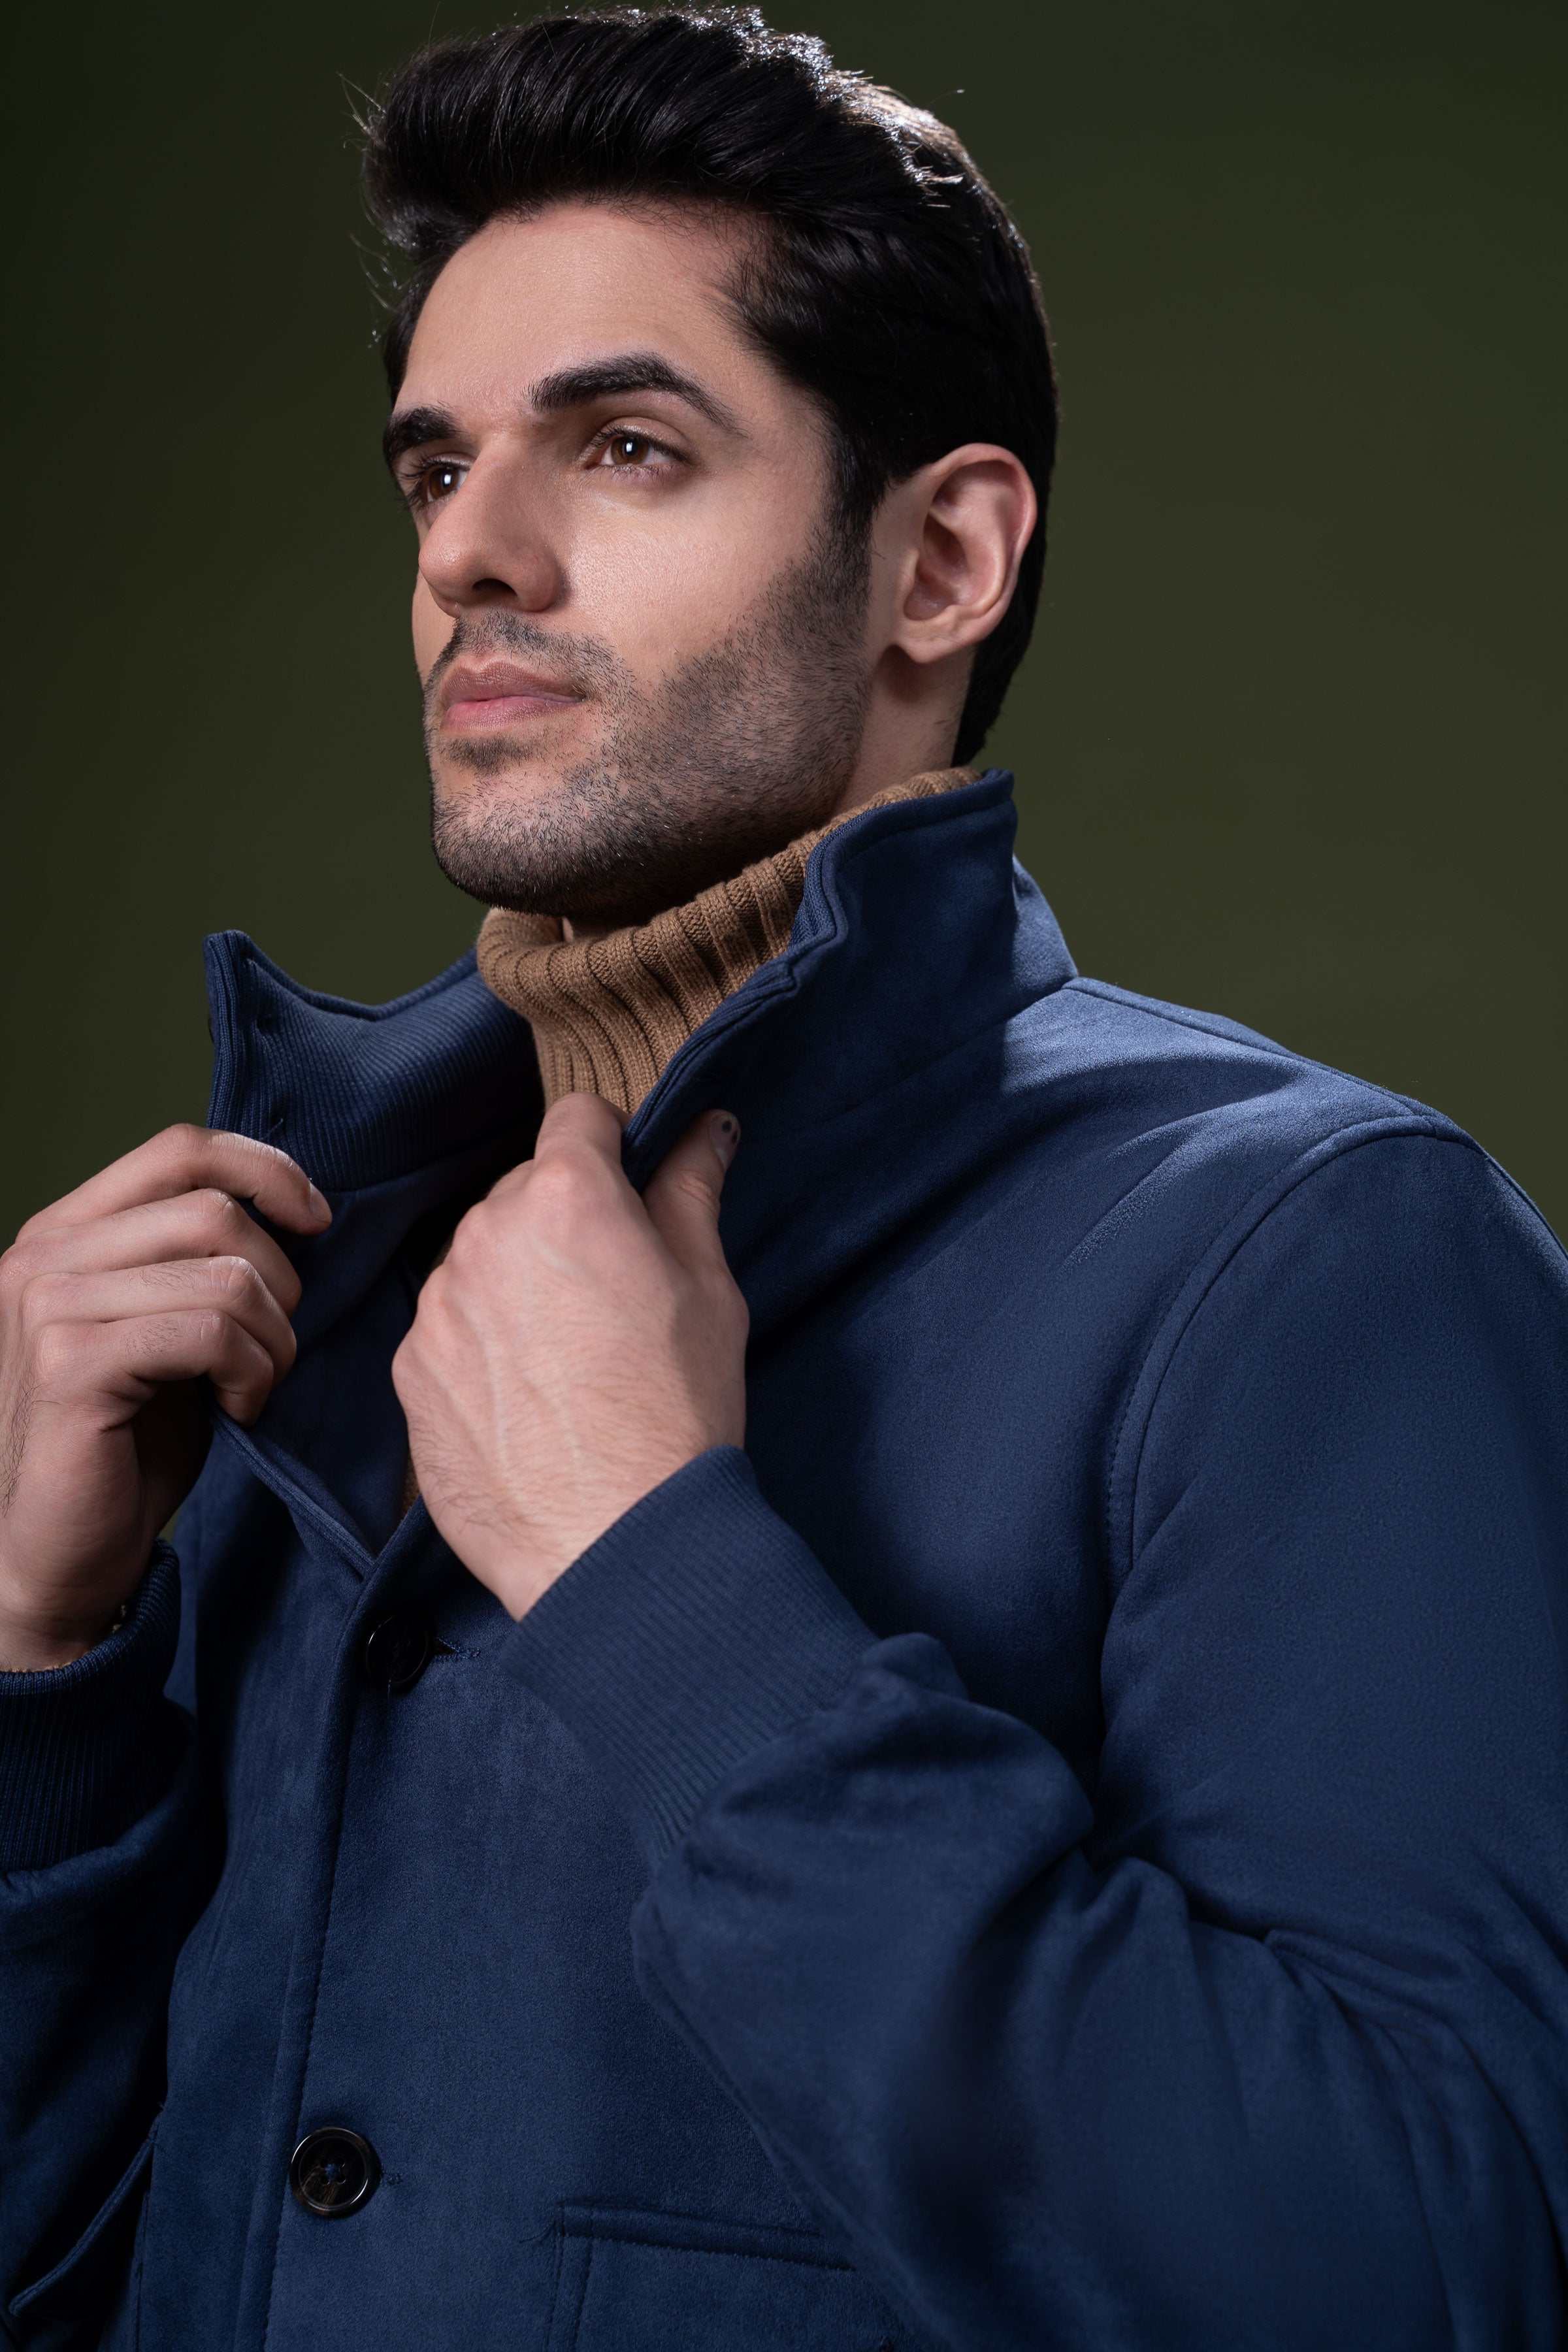 SUEDE JACKET NAVY at Charcoal Clothing